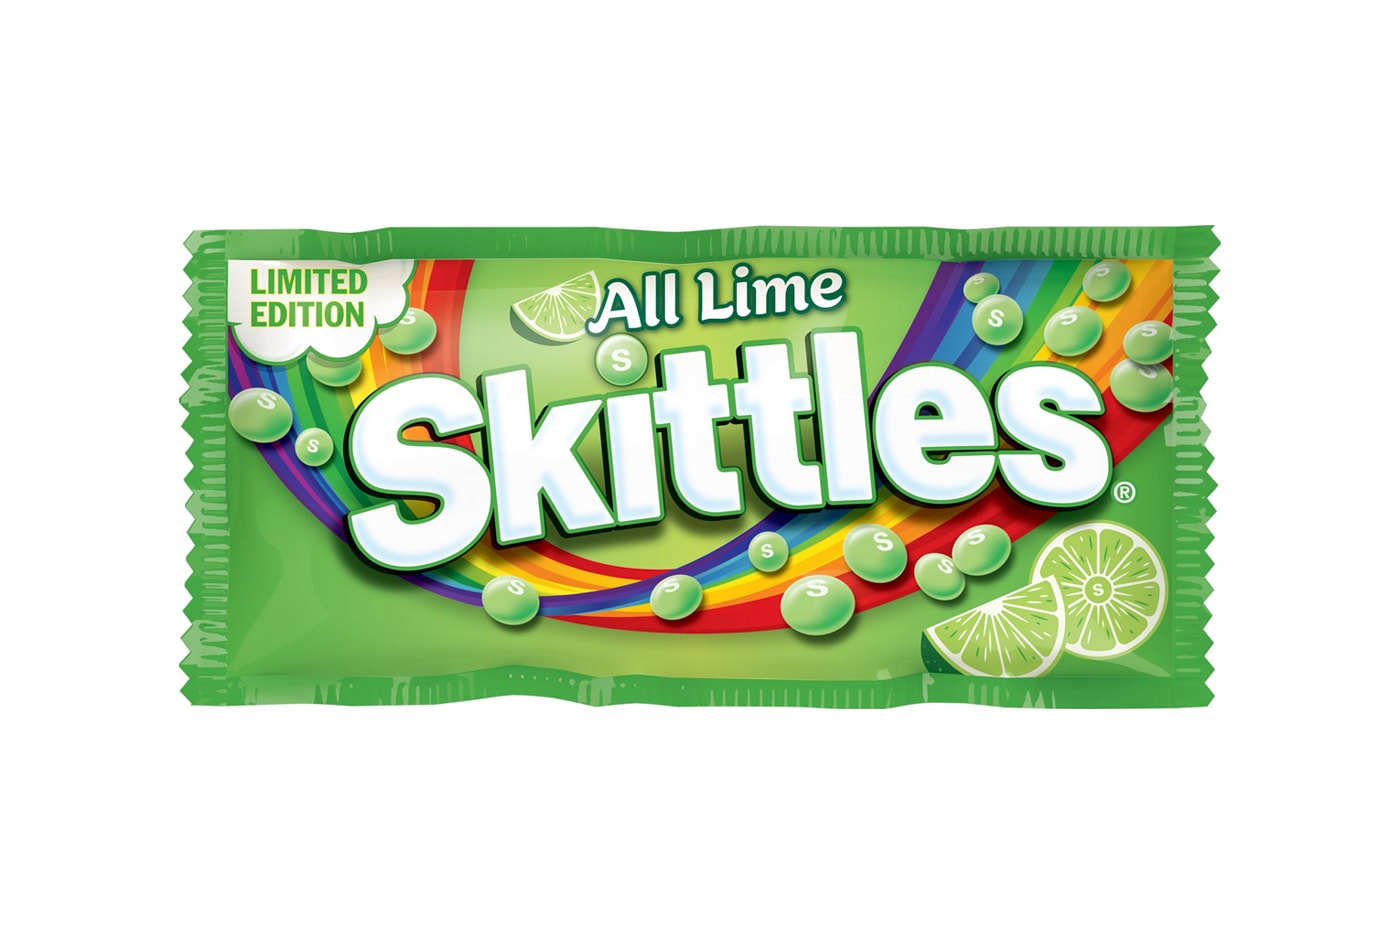 skittles all lime limited edition flavor release candy mars Wrigley confectionery sour soft candy 